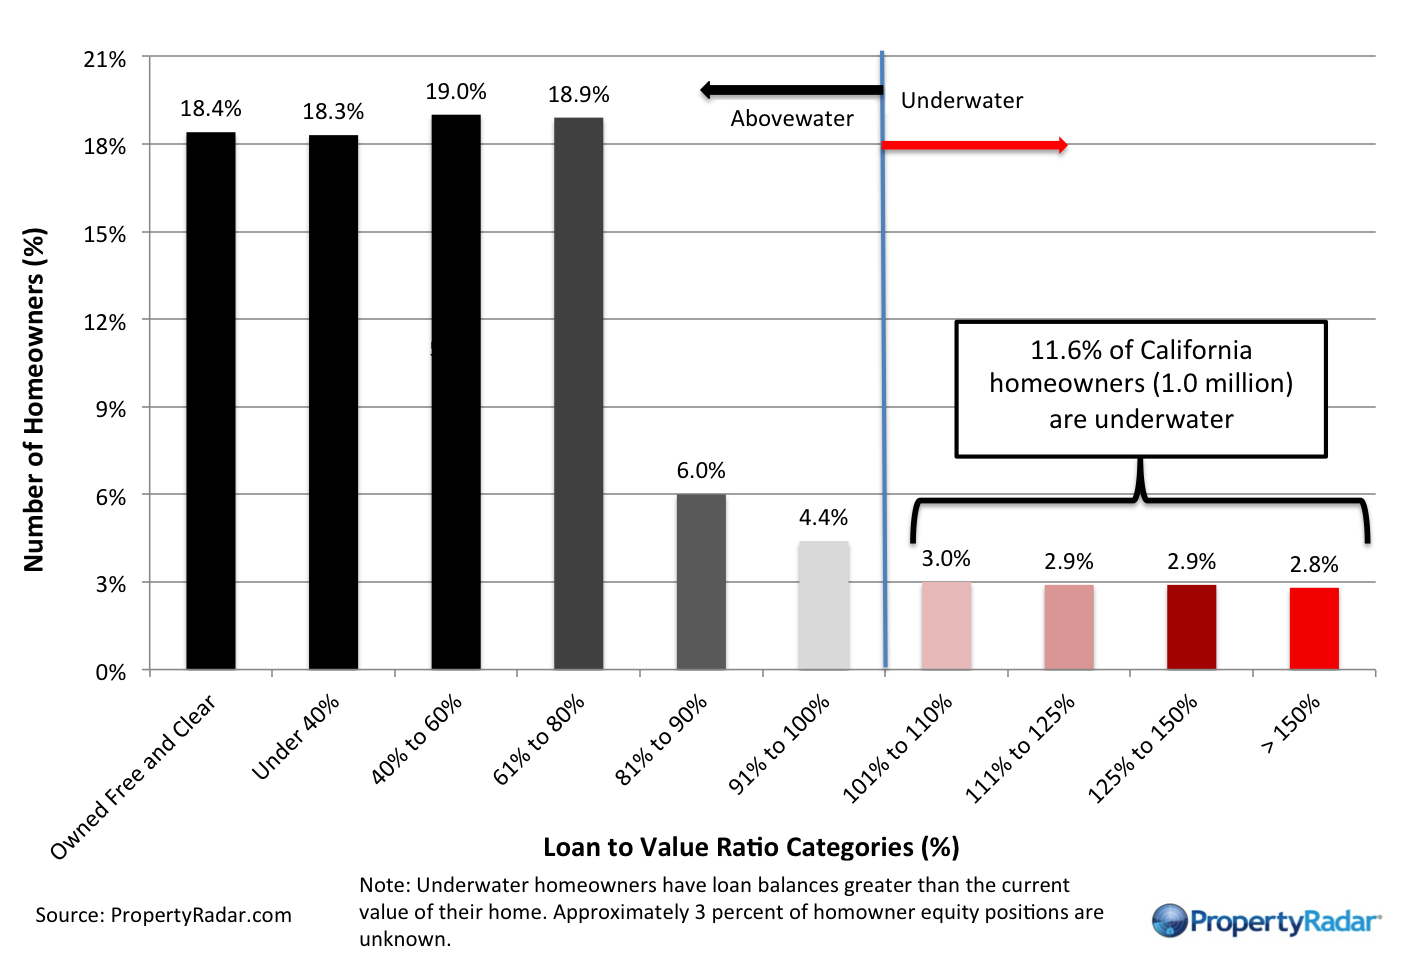 Loan to Value Ratio Categories